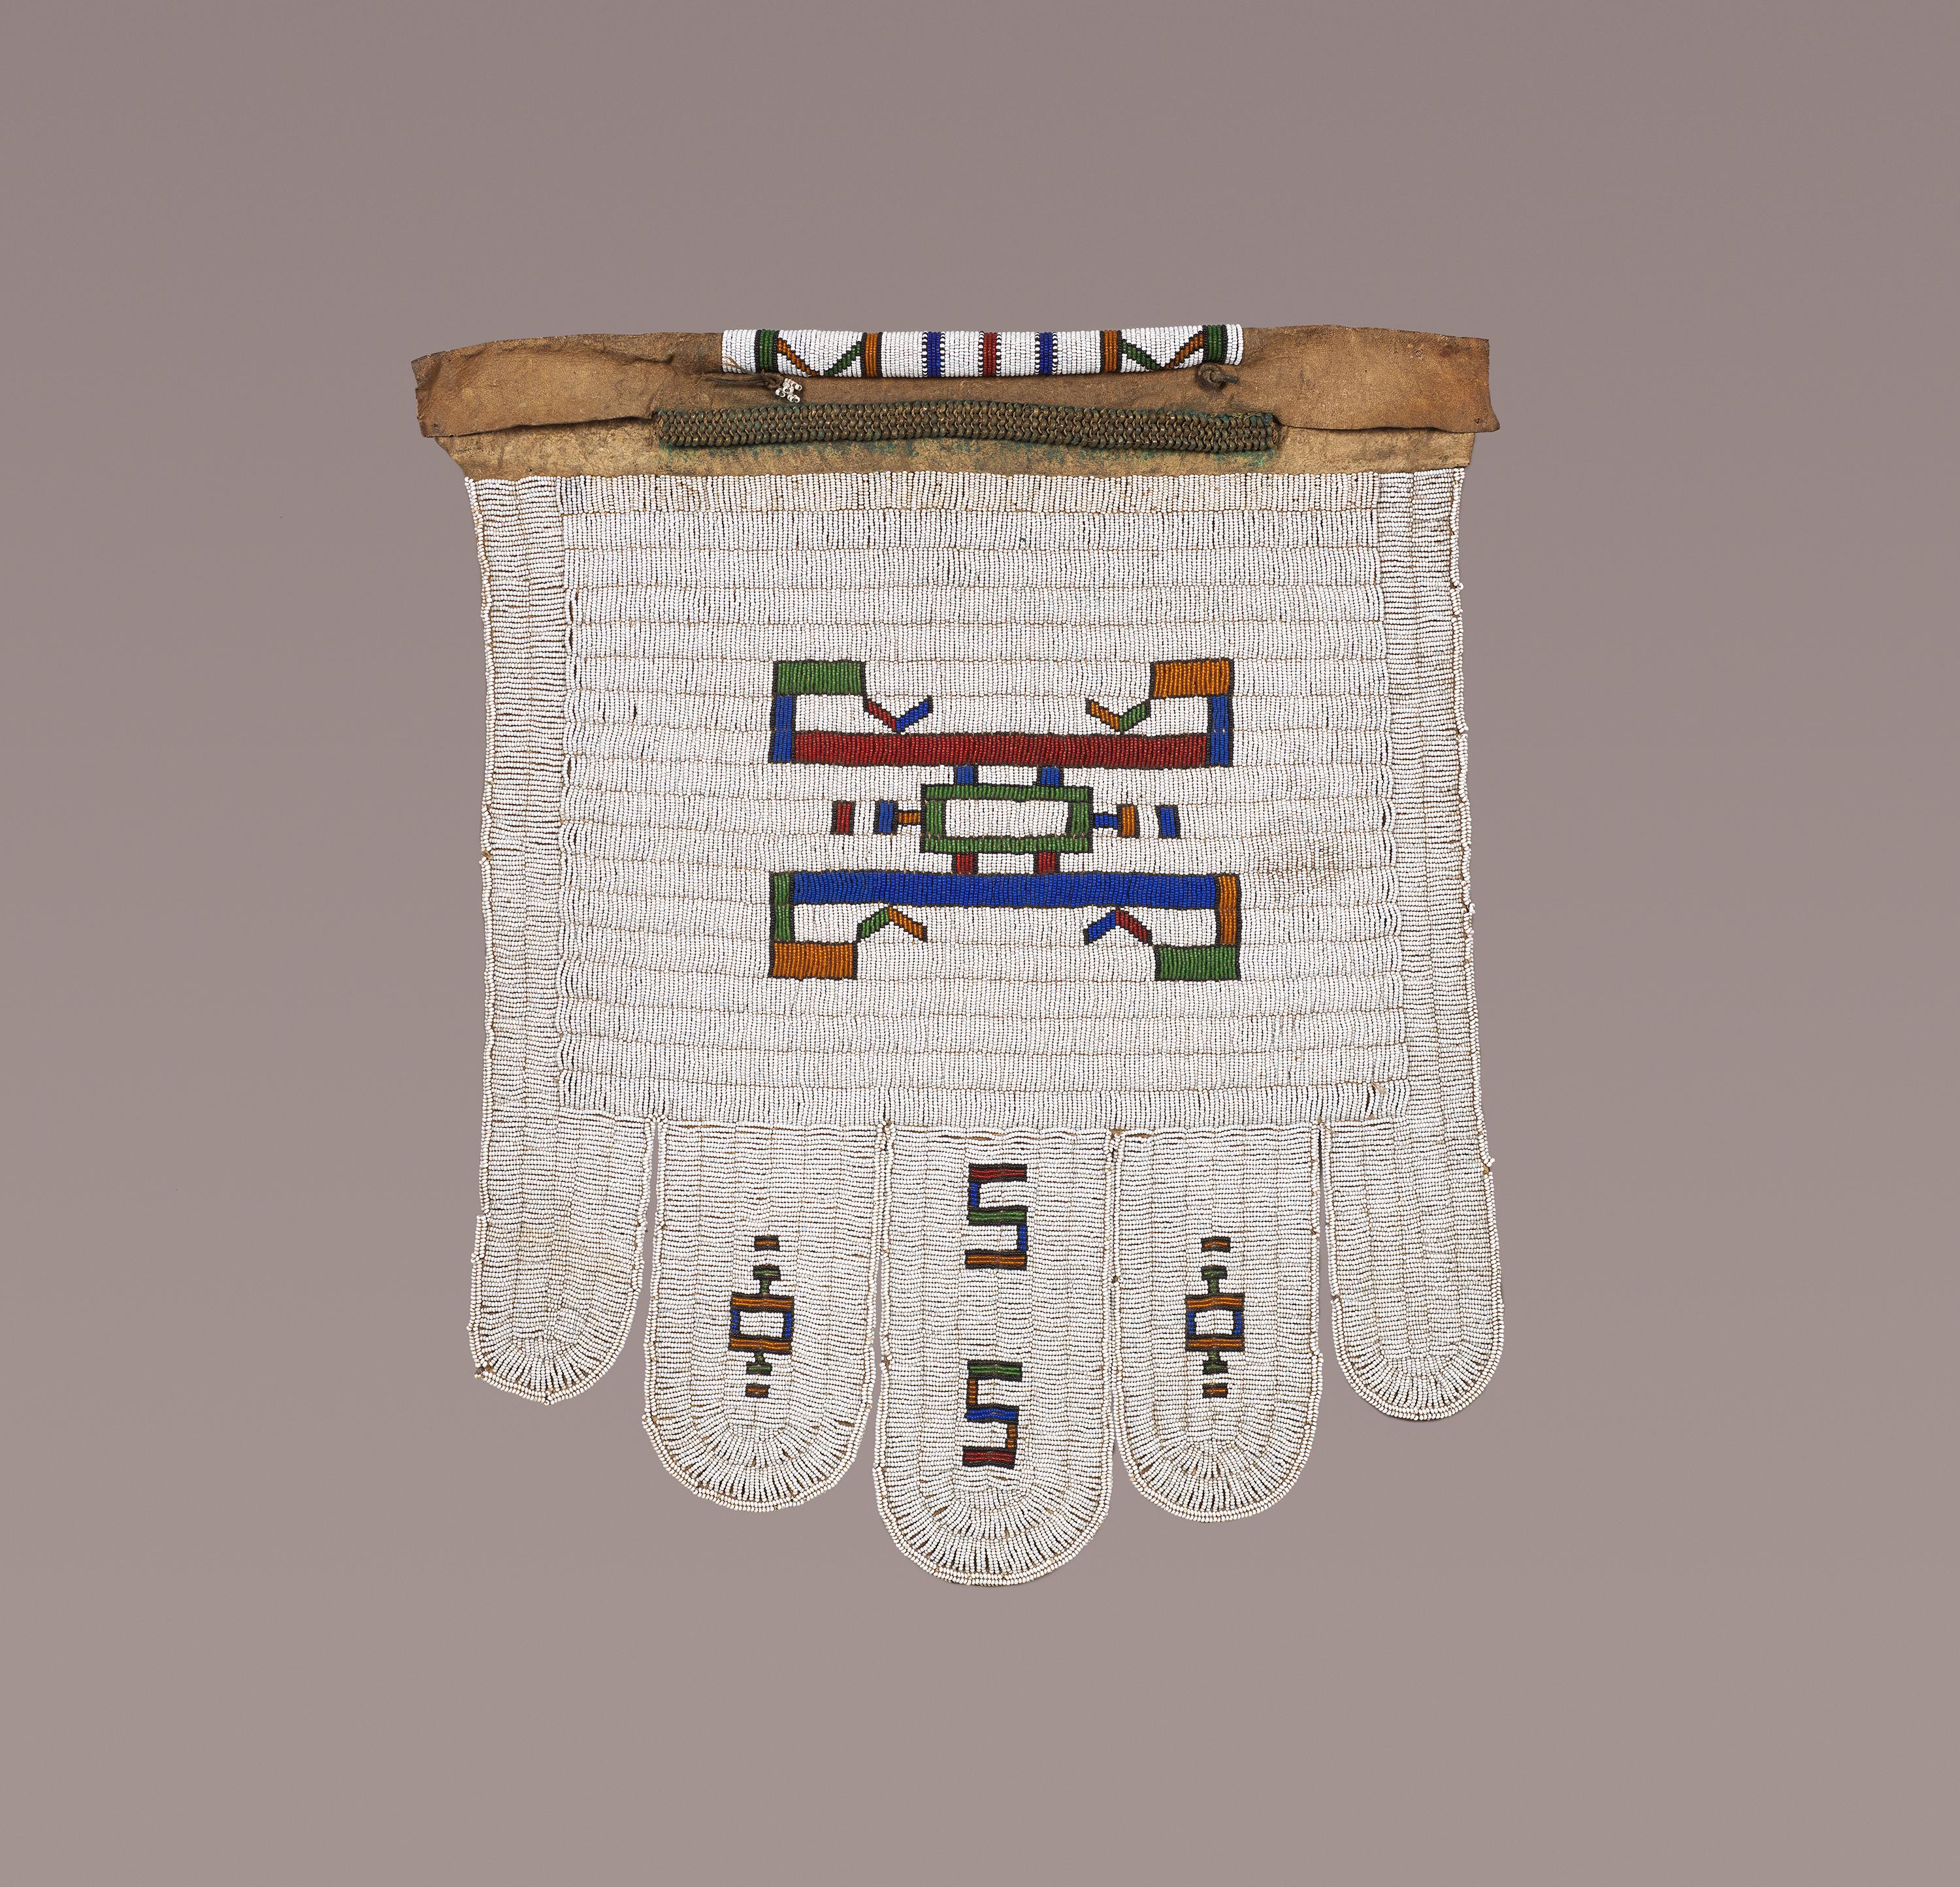 Married Woman’s Beaded Apron Jocolo 
Ndebele People, South Africa
Circa 1940-1950
Glass beads on leather (goatskin ?), handcart brass beads
In excellent condition